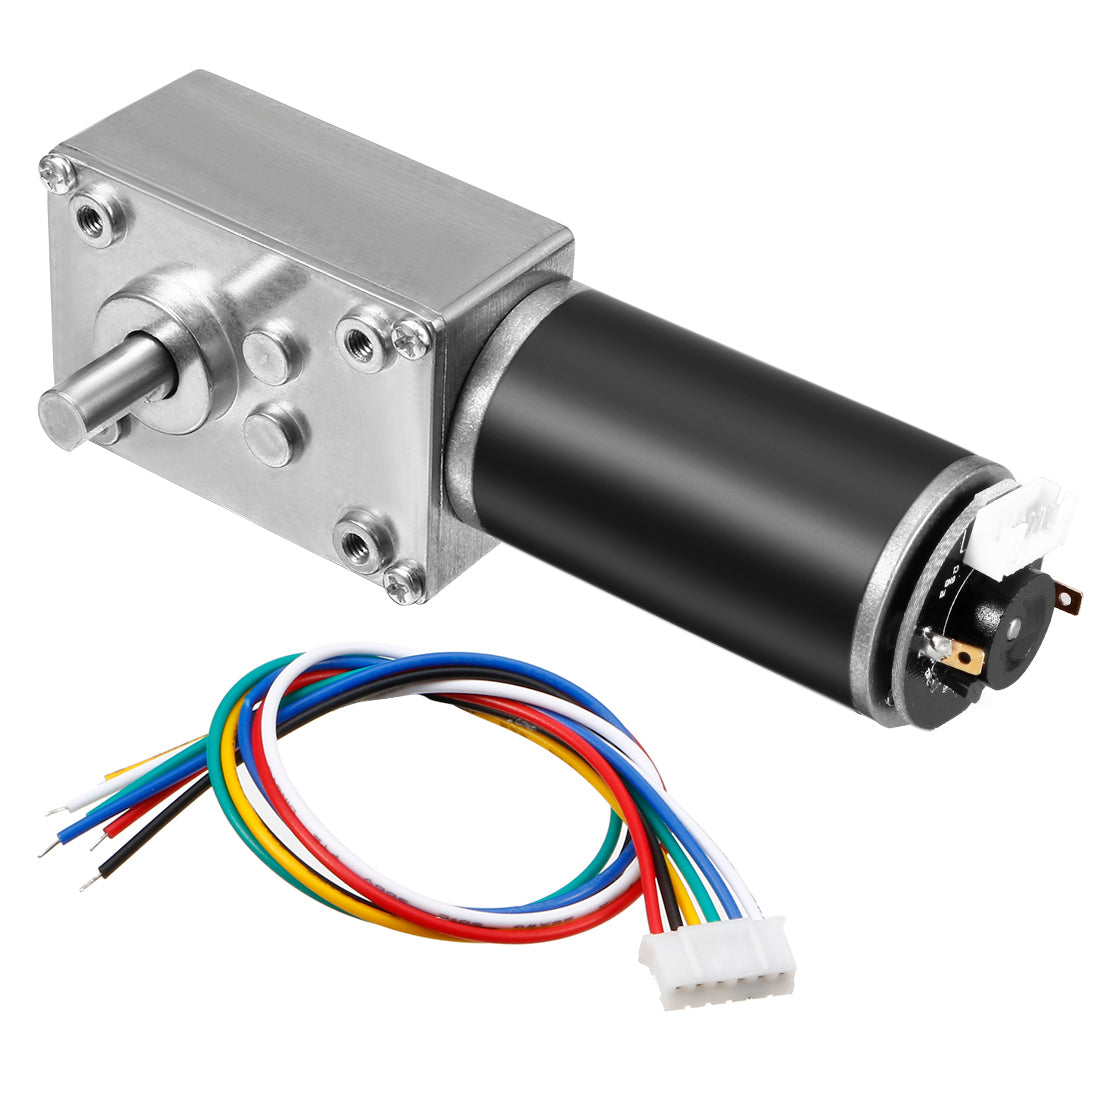 uxcell Uxcell DC 12V 111RPM 4Kg.cm Self-Locking Worm Gear Motor With Encoder And Cable, High Torque Speed Reduction Motor